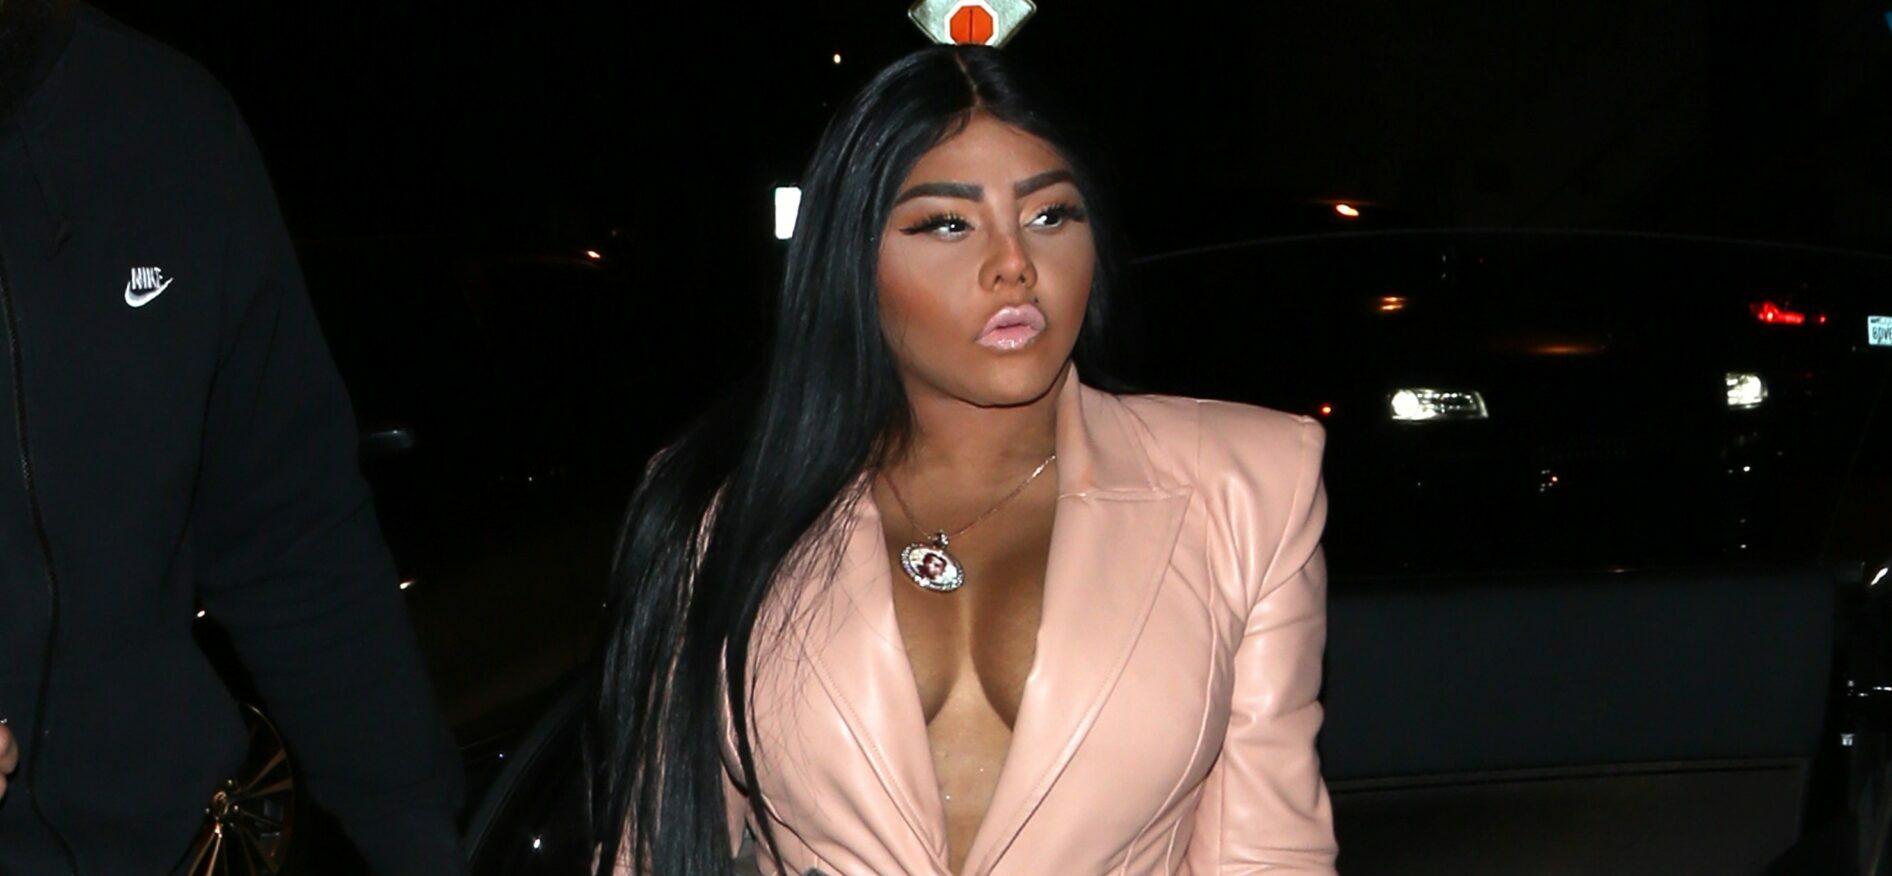 Lil' Kim was seen arriving for dinner at 'Craigs' Restaurant in West Hollywood, CA